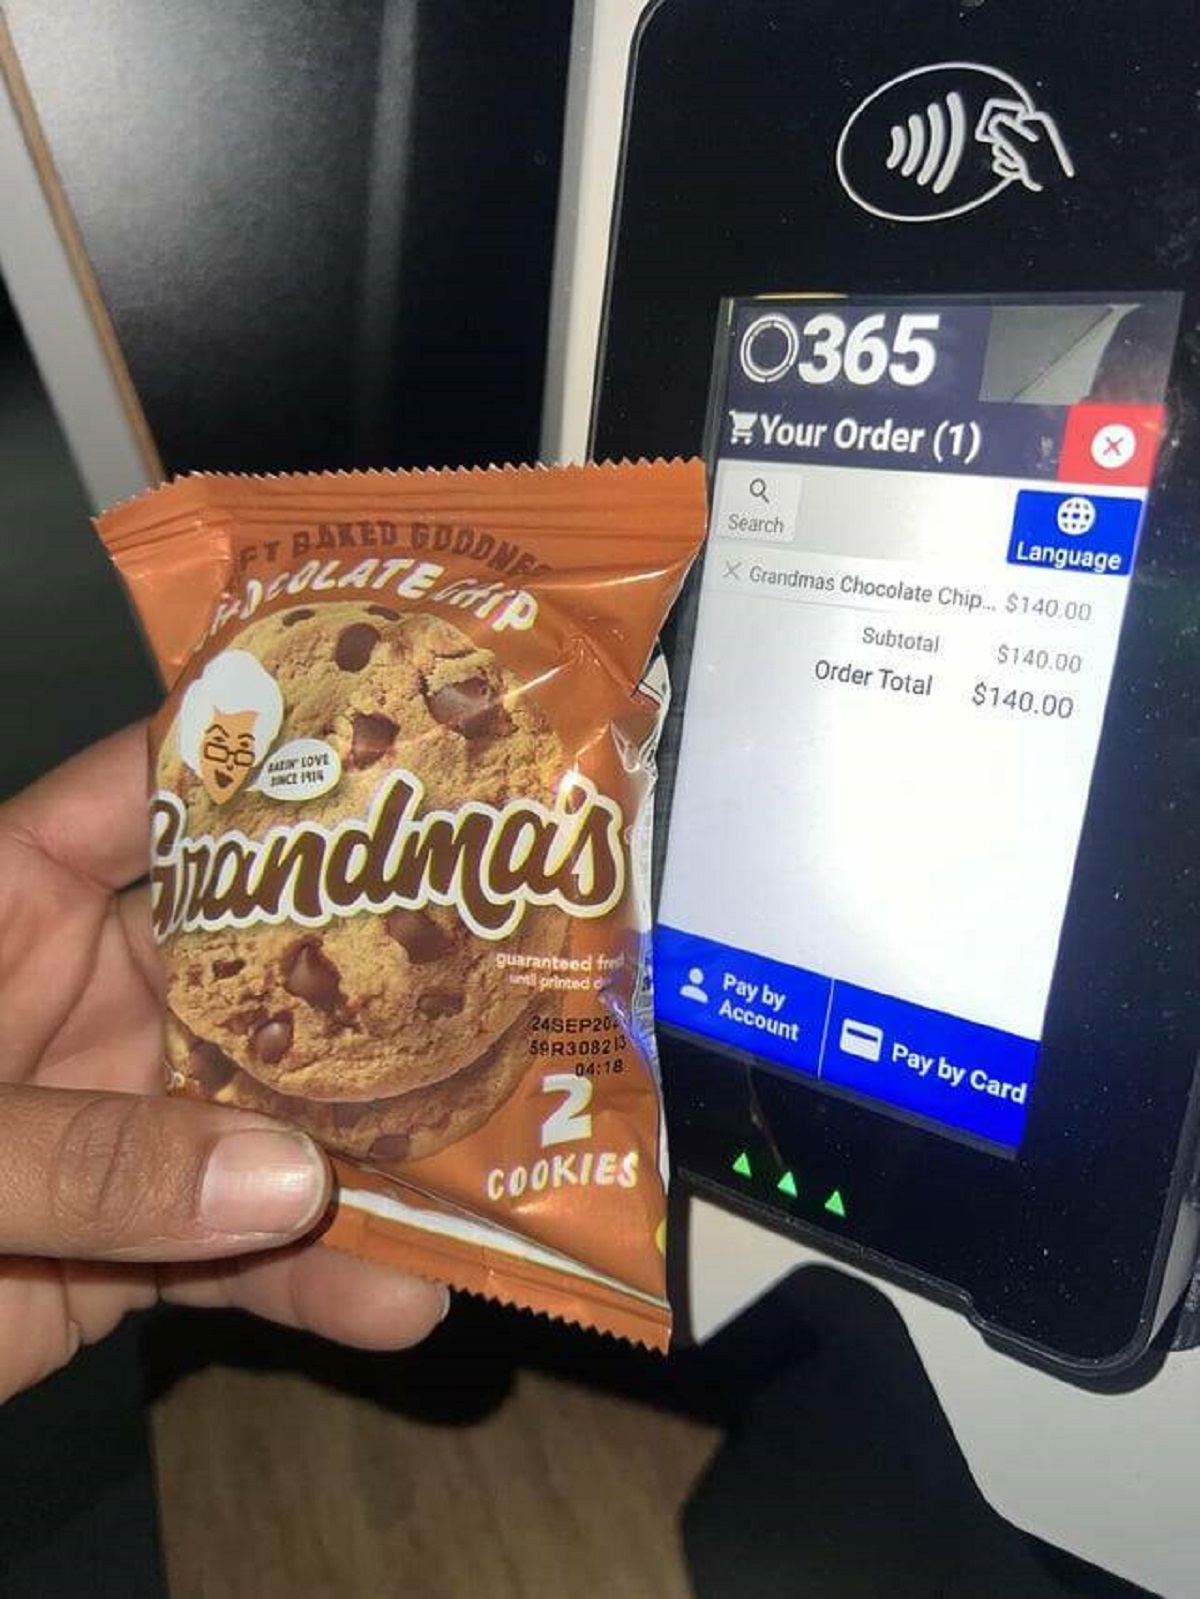 chocolate - Ft Baked Goodnes 0365 Your Order 1 Q Search Language XGrandmas Chocolate Chip... $140.00 Subtotal $140.00 Bazin Love Since 1914 Brandma's guaranteed fred until printed d 24SEP20 59R308213 Pay by Account N Cookies Order Total $140.00 Pay by Car